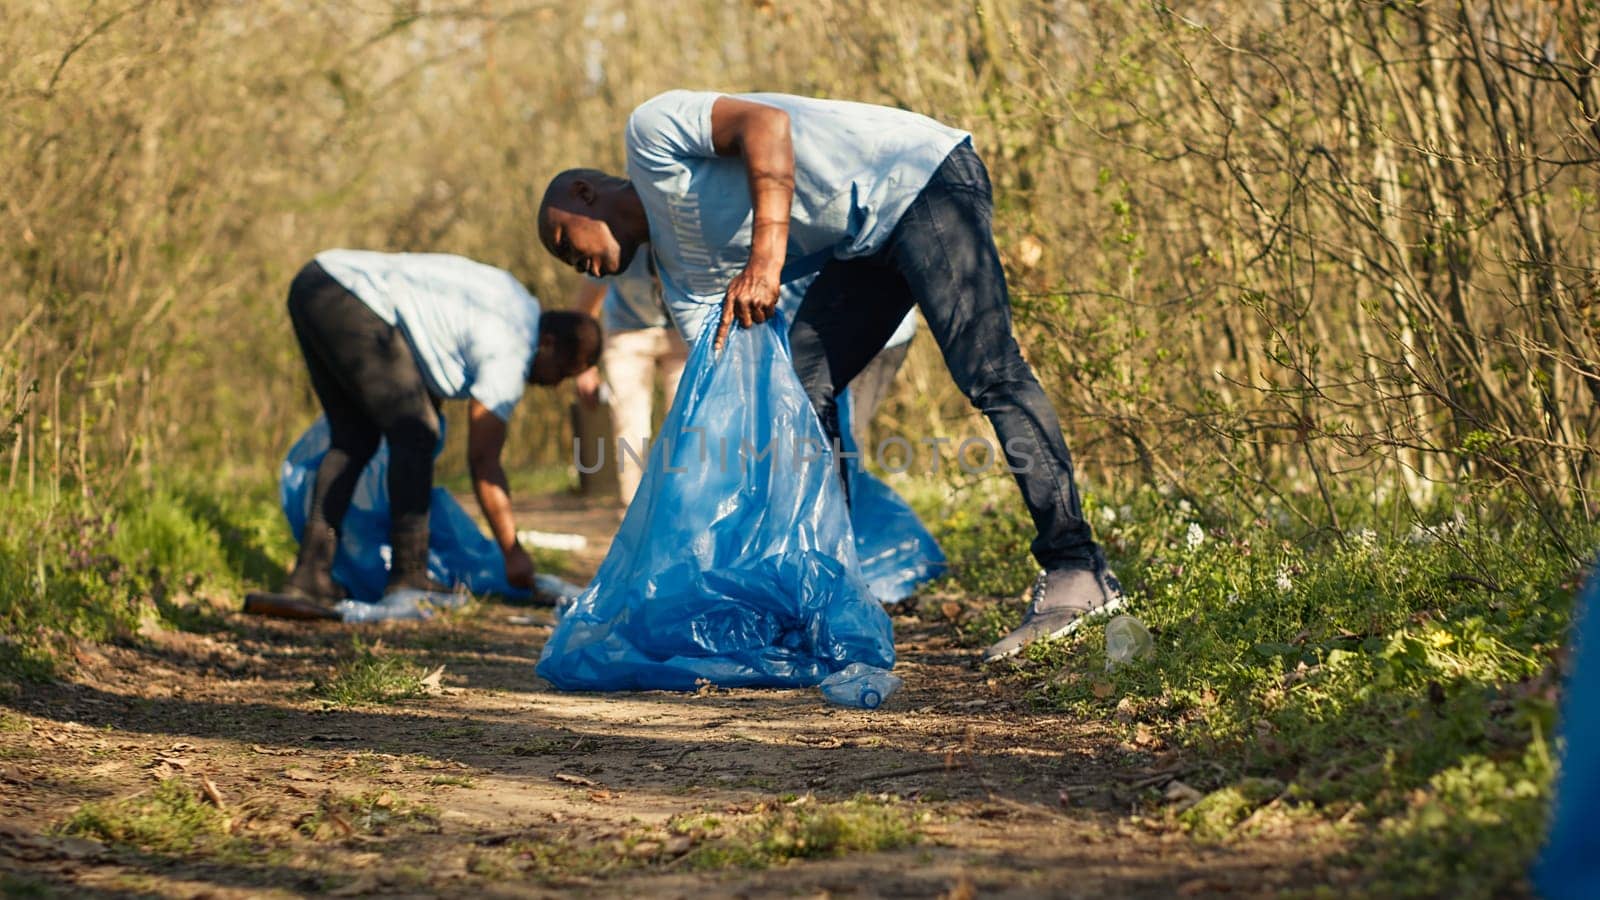 People picking up trash and plastic bottles from the forest area, protecting the natural environment and doing voluntary work. Activists group cleaning the woods, recycling waste. Camera A.